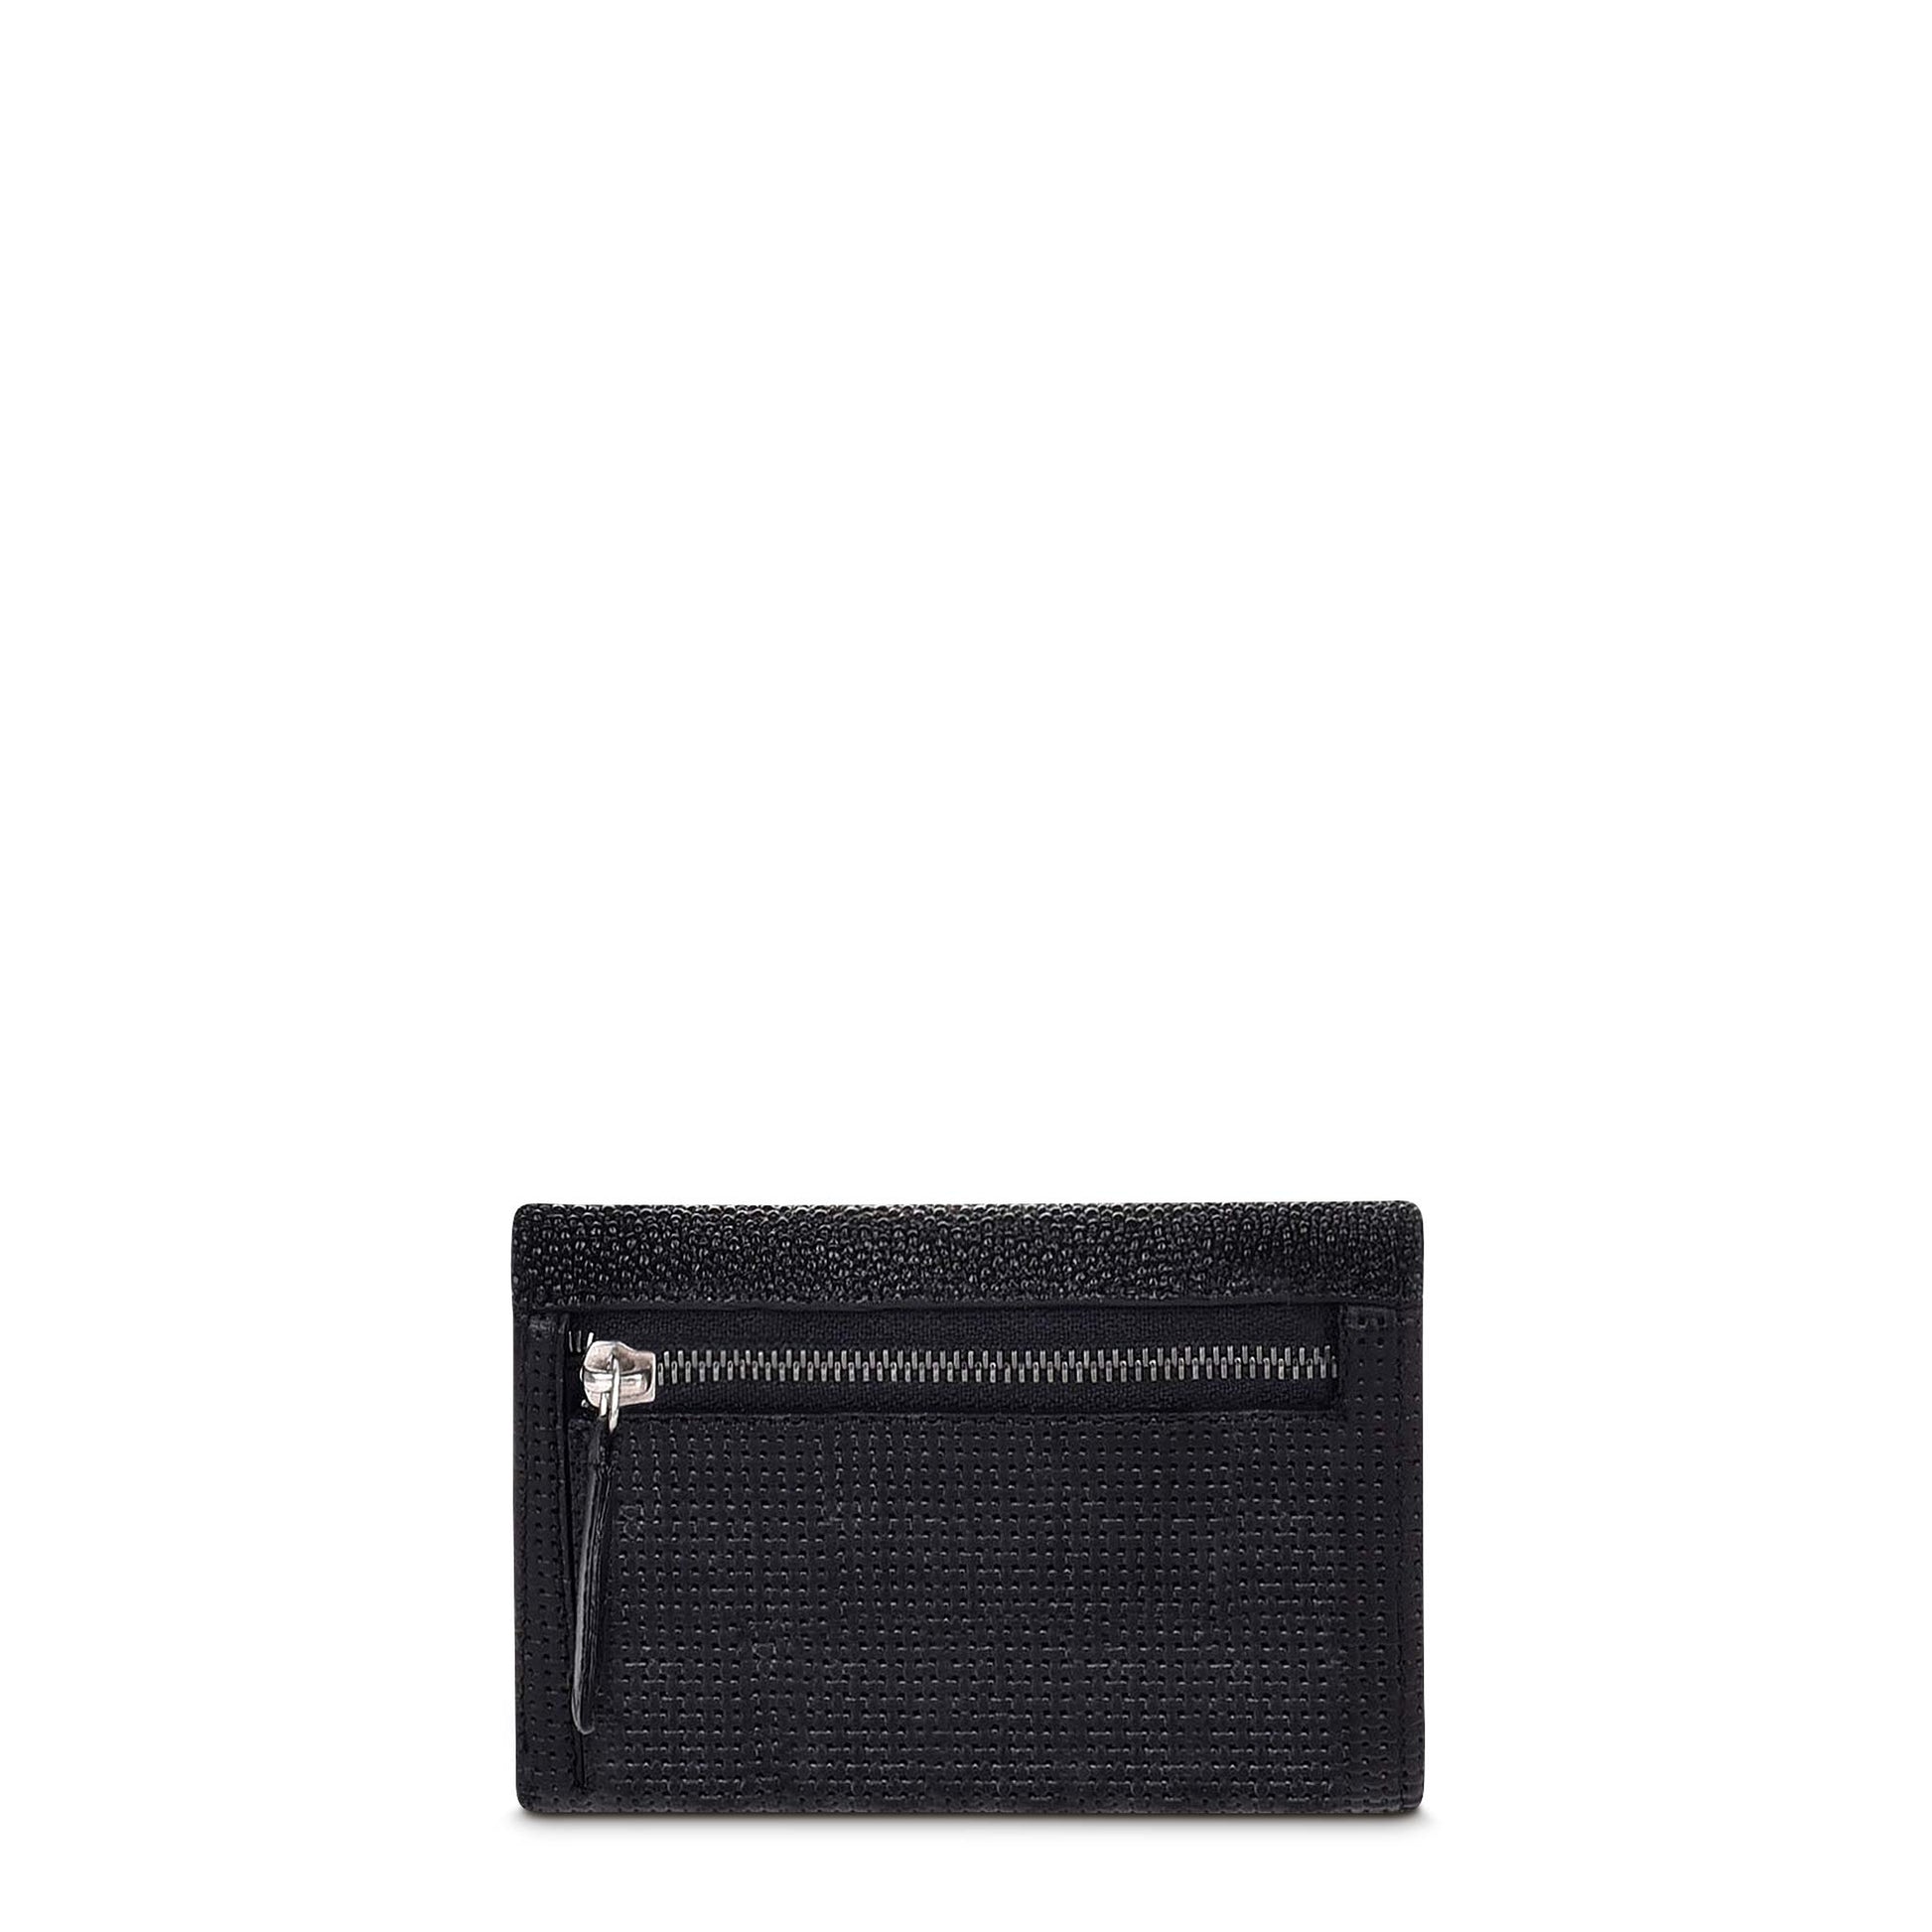 At the back of the wallet, a zipper pocket provides a secure place for coins